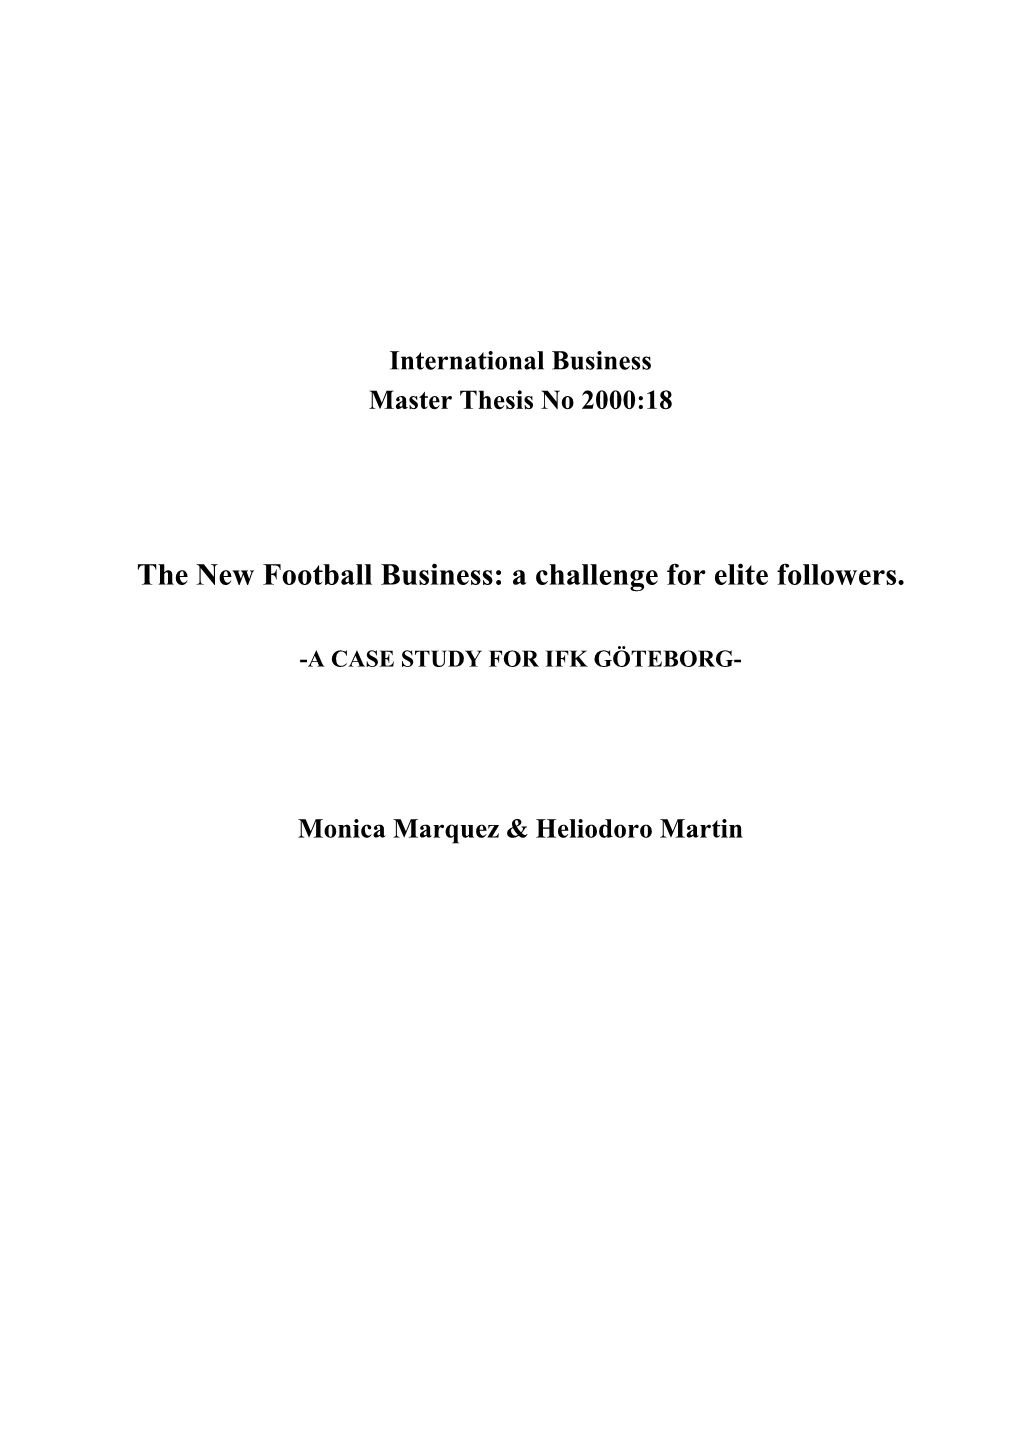 The New Football Business: a Challenge for Elite Followers